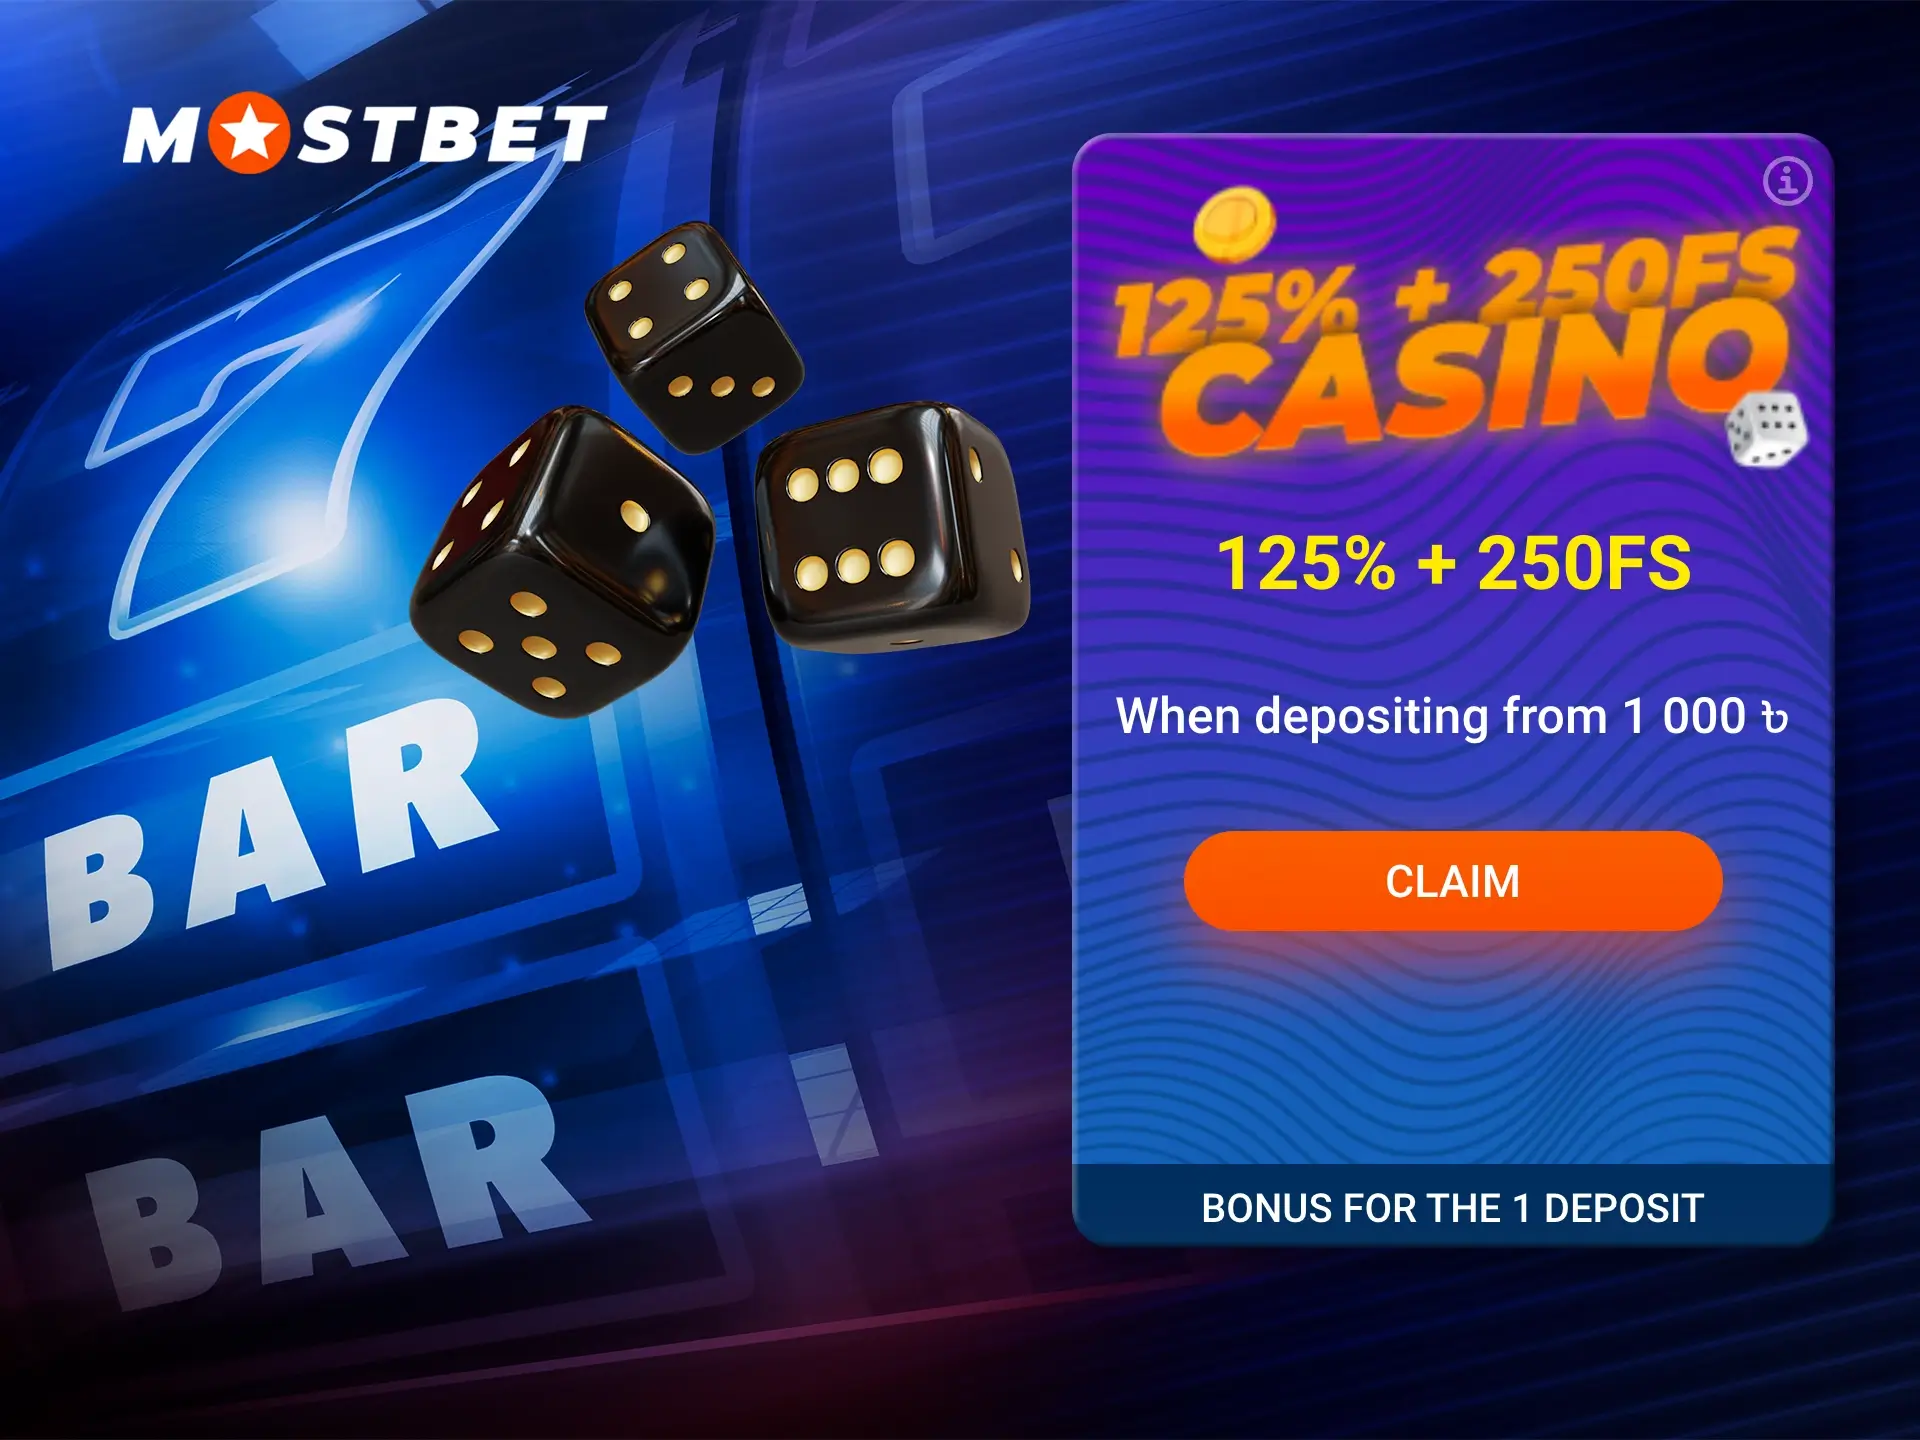 Mostbet's welcome bonus is notable for its large cash accruals and huge number of free spins.